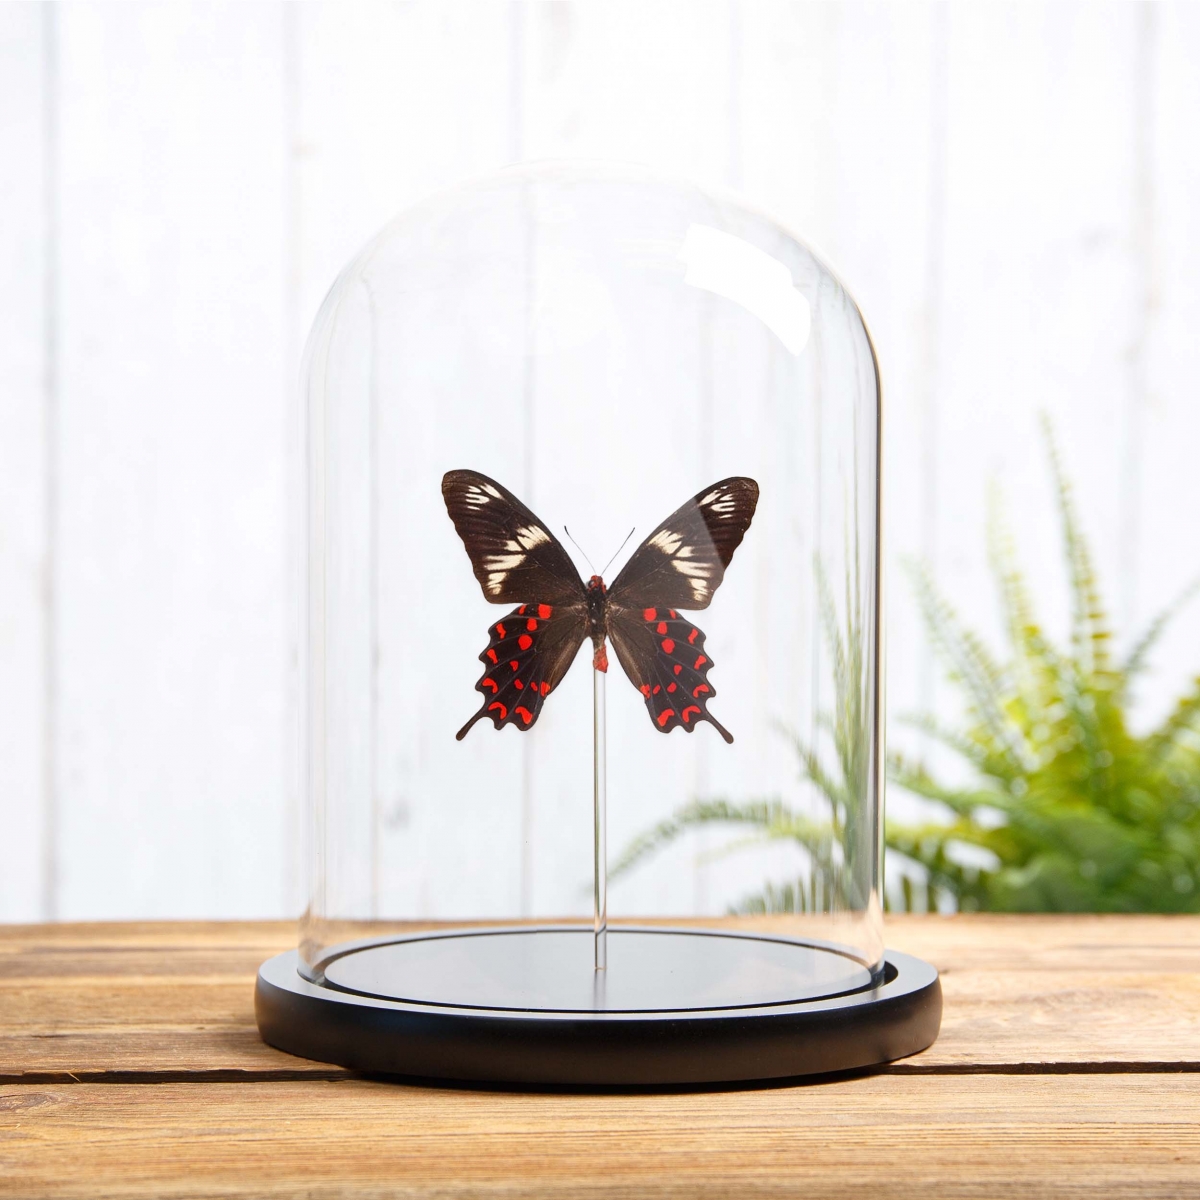 Minibeast The Crimson Rose Butterfly in Glass Dome with Wooden Base (Pachliopta hector)